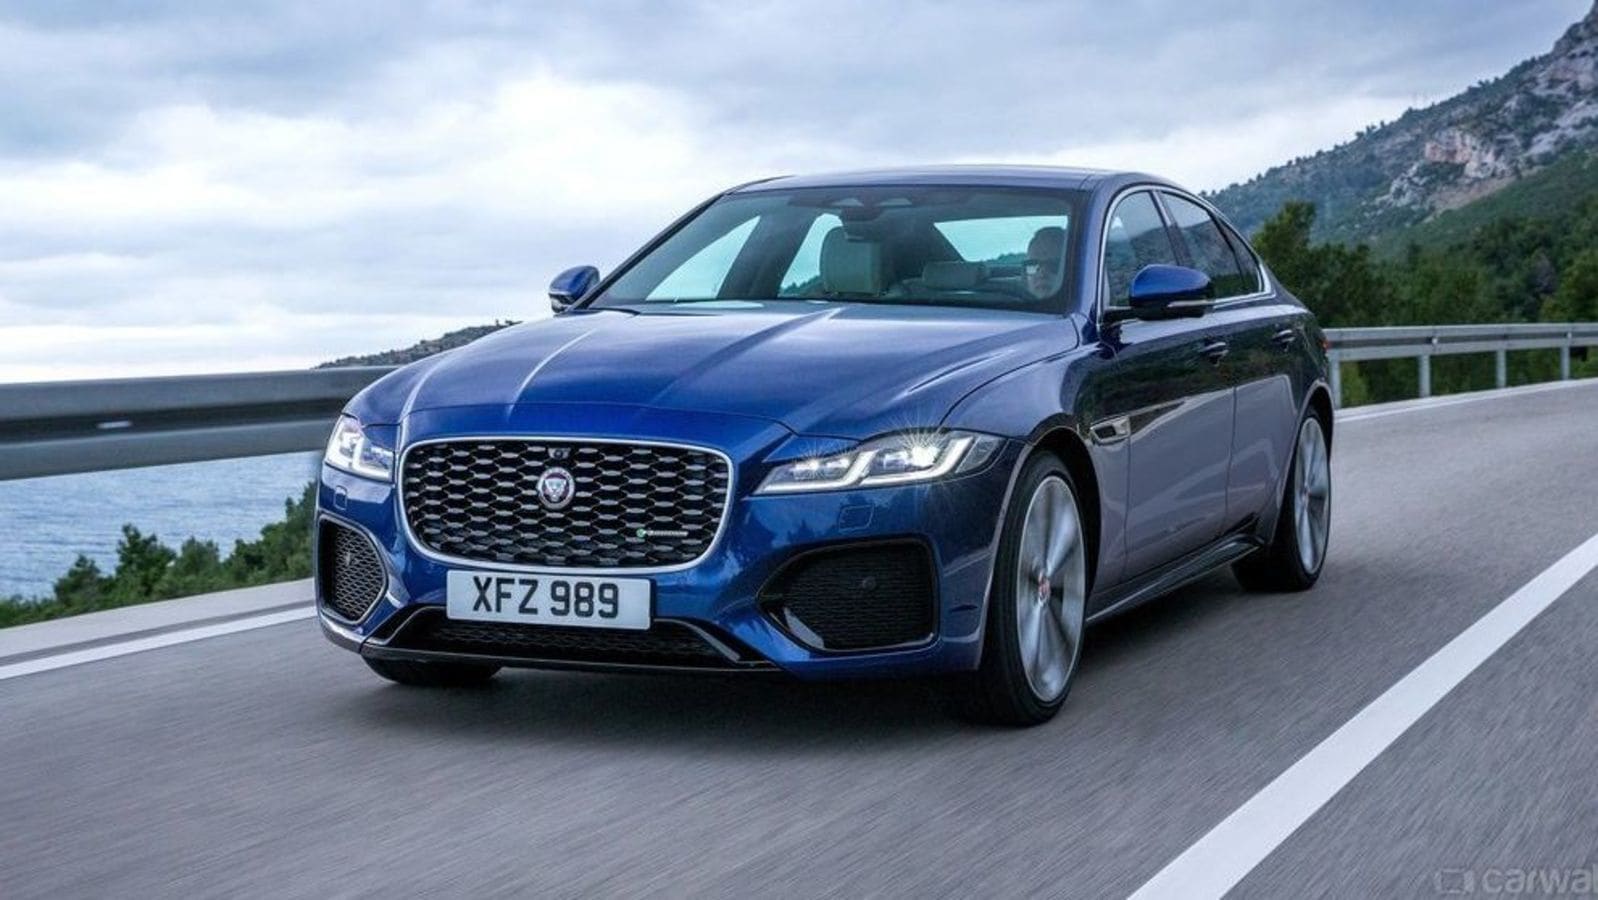 Jaguar XF 2021 luxury sedan launched in India, price starts at 71.60 lakh